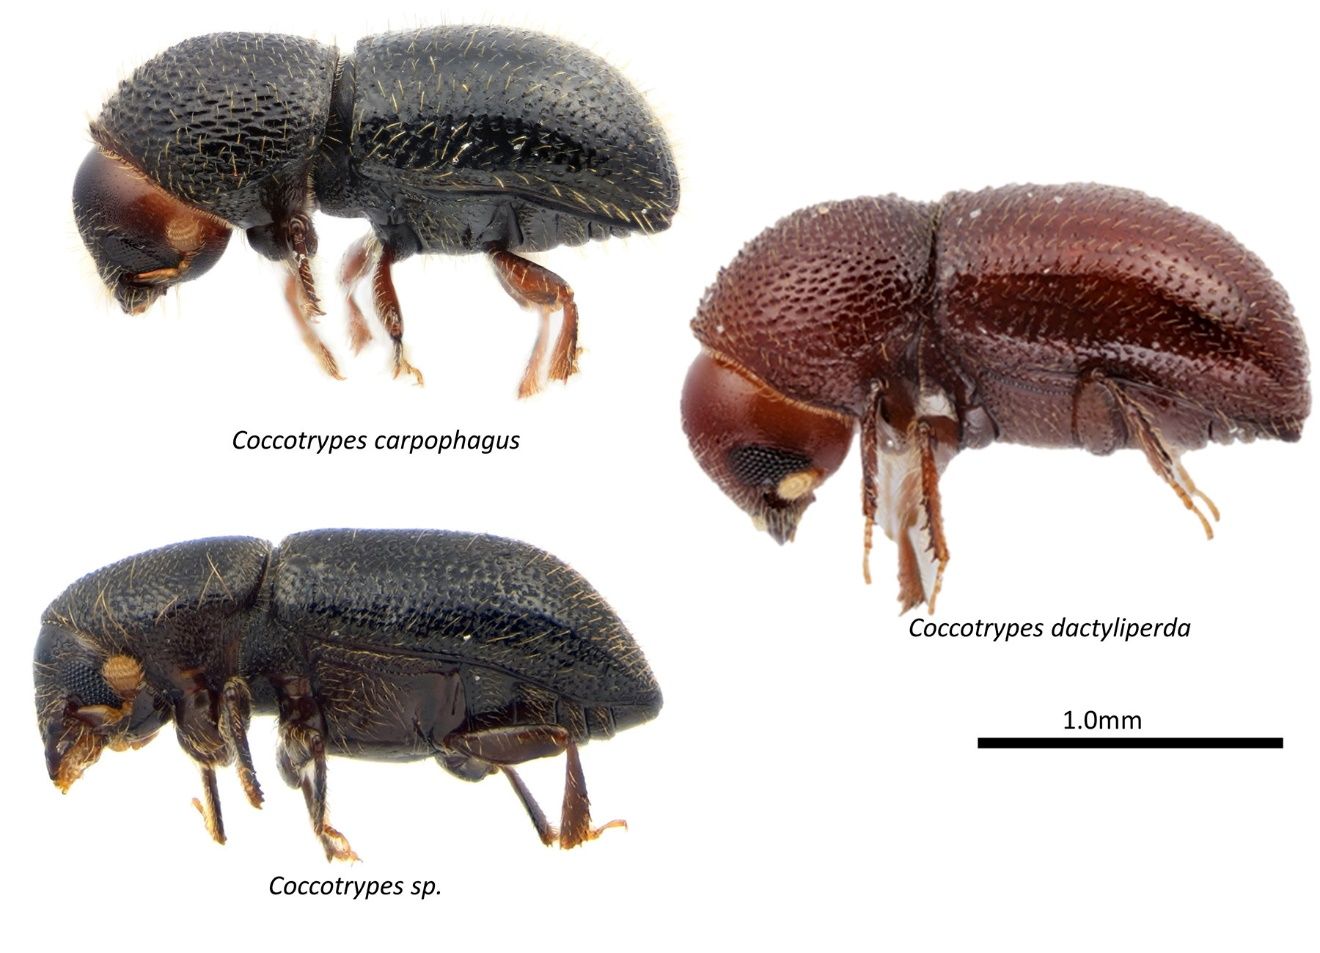 Examples of species in the genus Coccotrypes. 